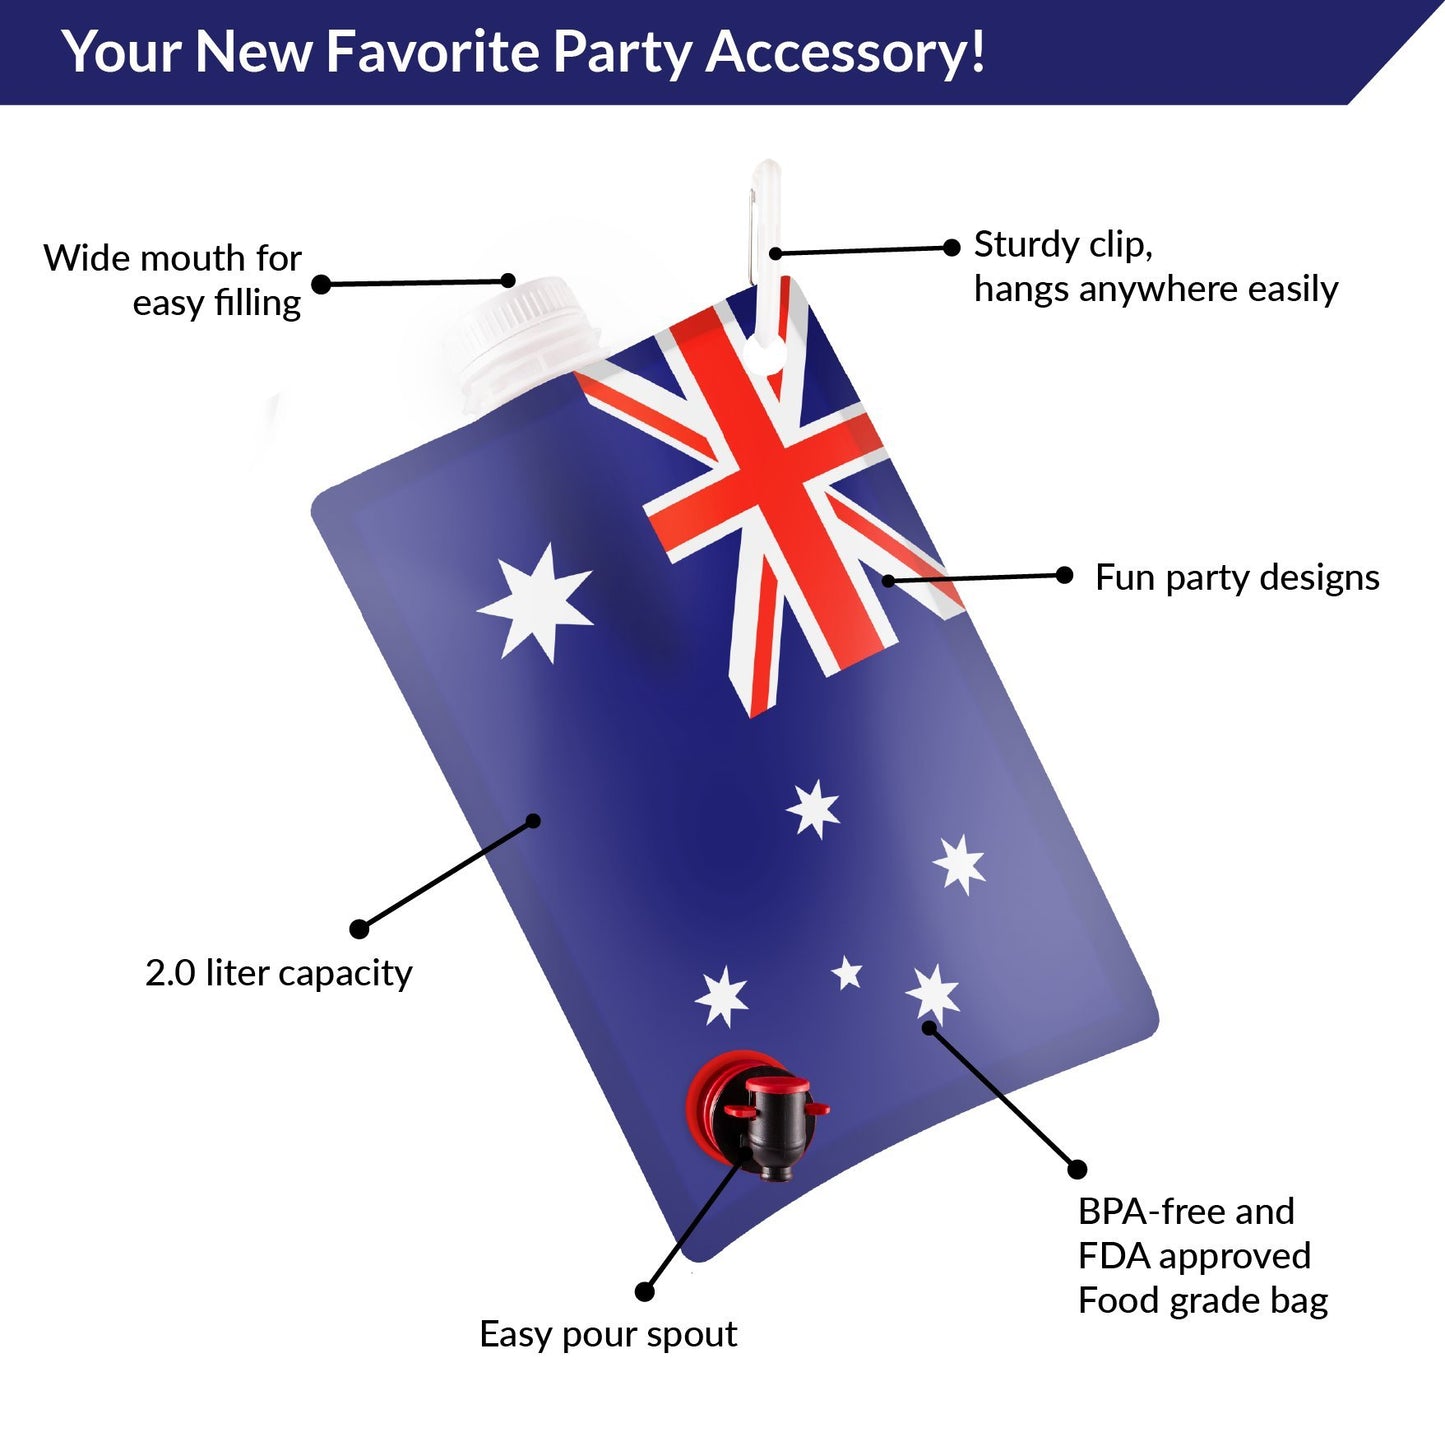 Australian Flag Adult Party Flask: 2 liter Flasks Make the Perfect Drink Dispenser for Your Australia Day Party Supplies, Summer Beach or Pool Party, Soccer, Cricket, or Football Tailgating and More